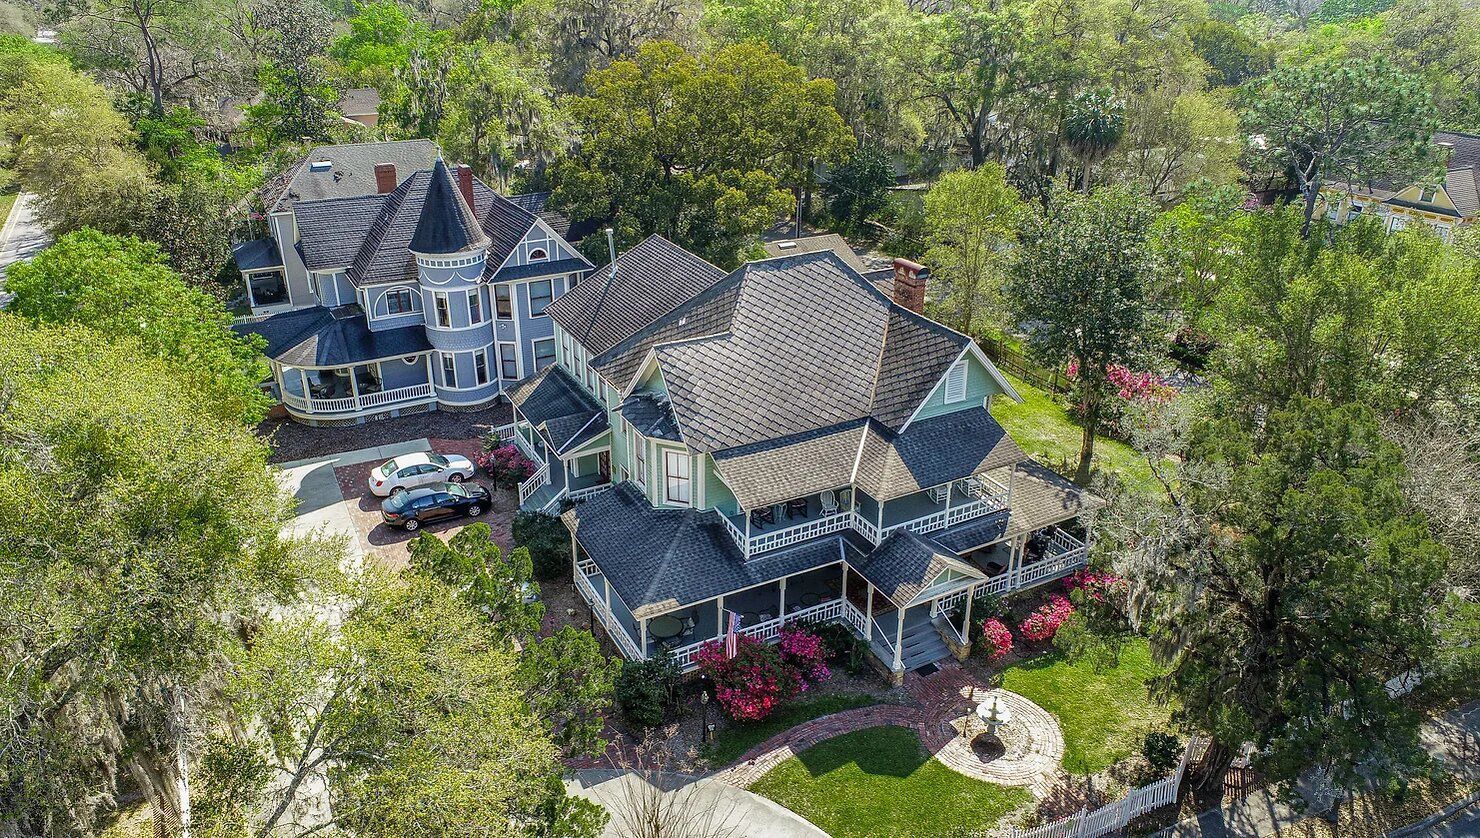 An aerial view of The Camellia Rose Inn and Hodges House in Gainesville, FL.